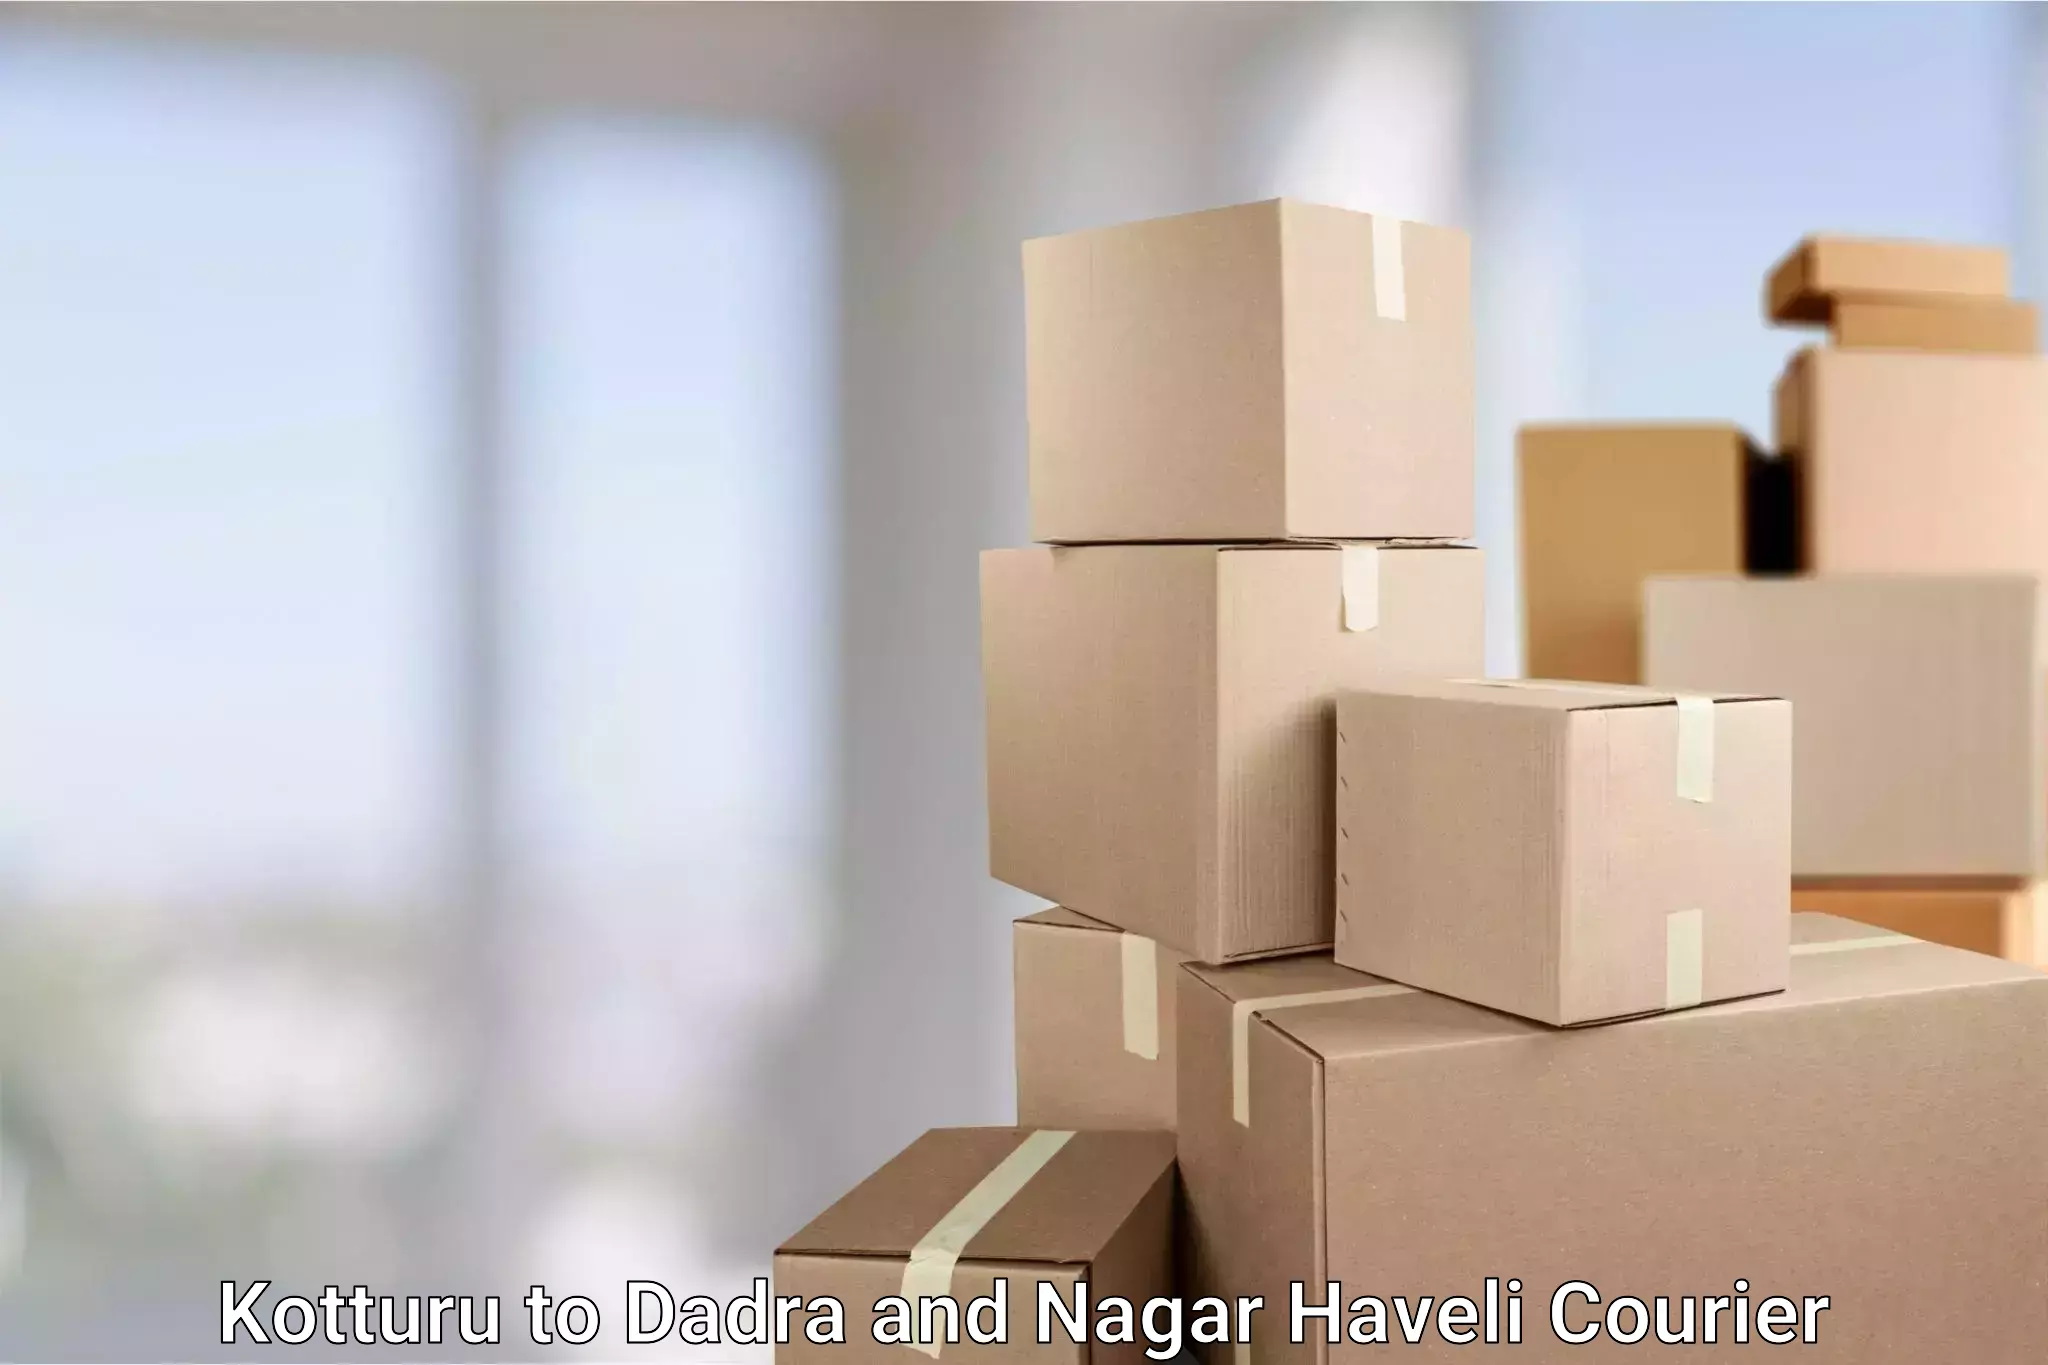 State-of-the-art courier technology Kotturu to Dadra and Nagar Haveli